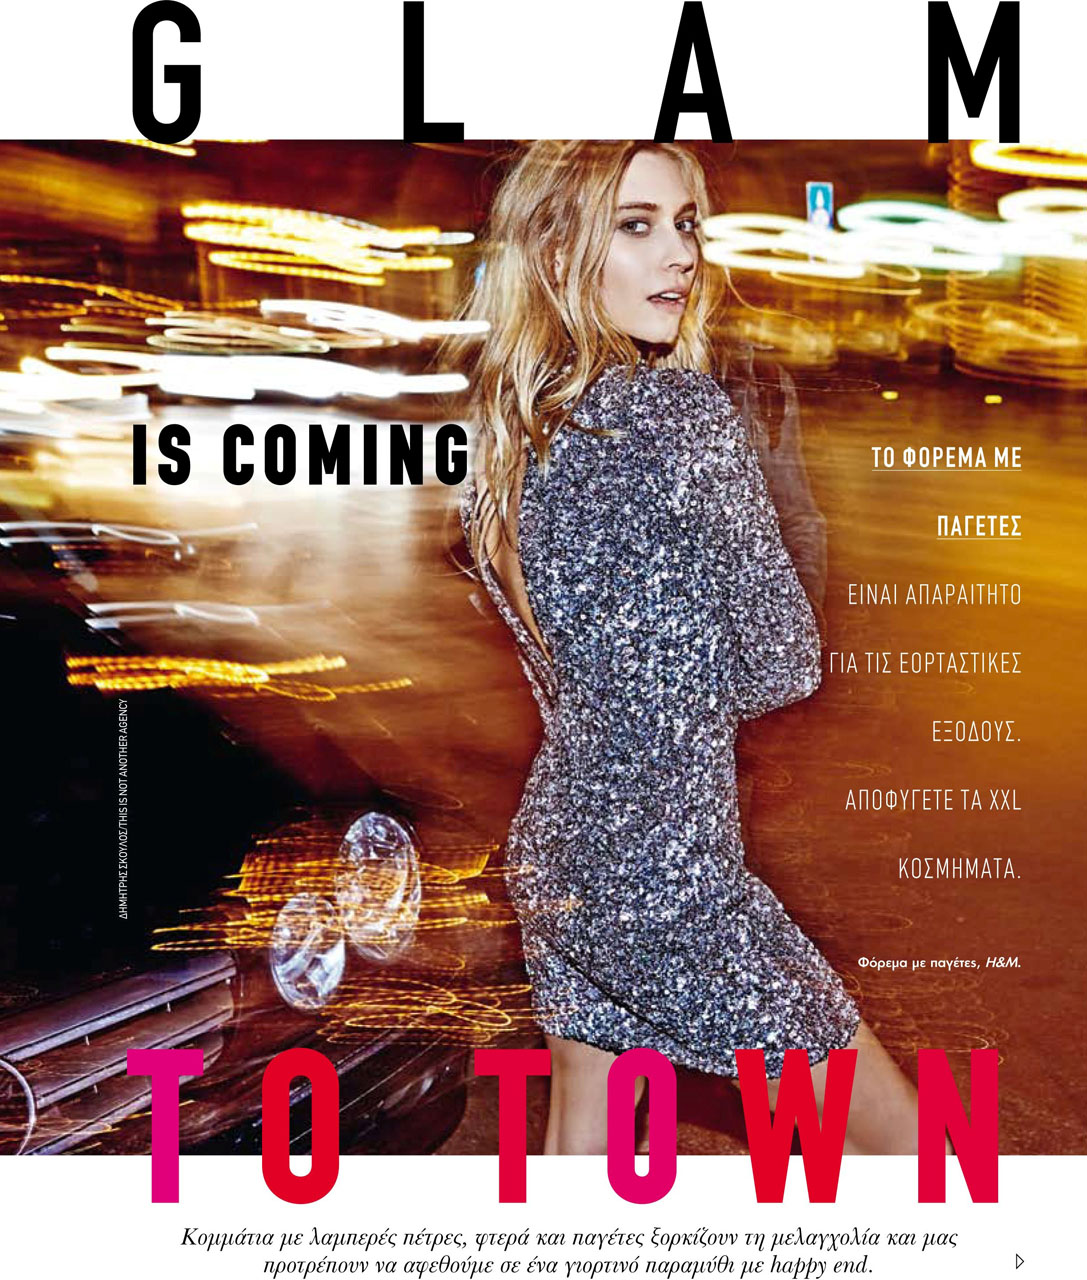 Marla Fabri brings the glam back to town for Elle.